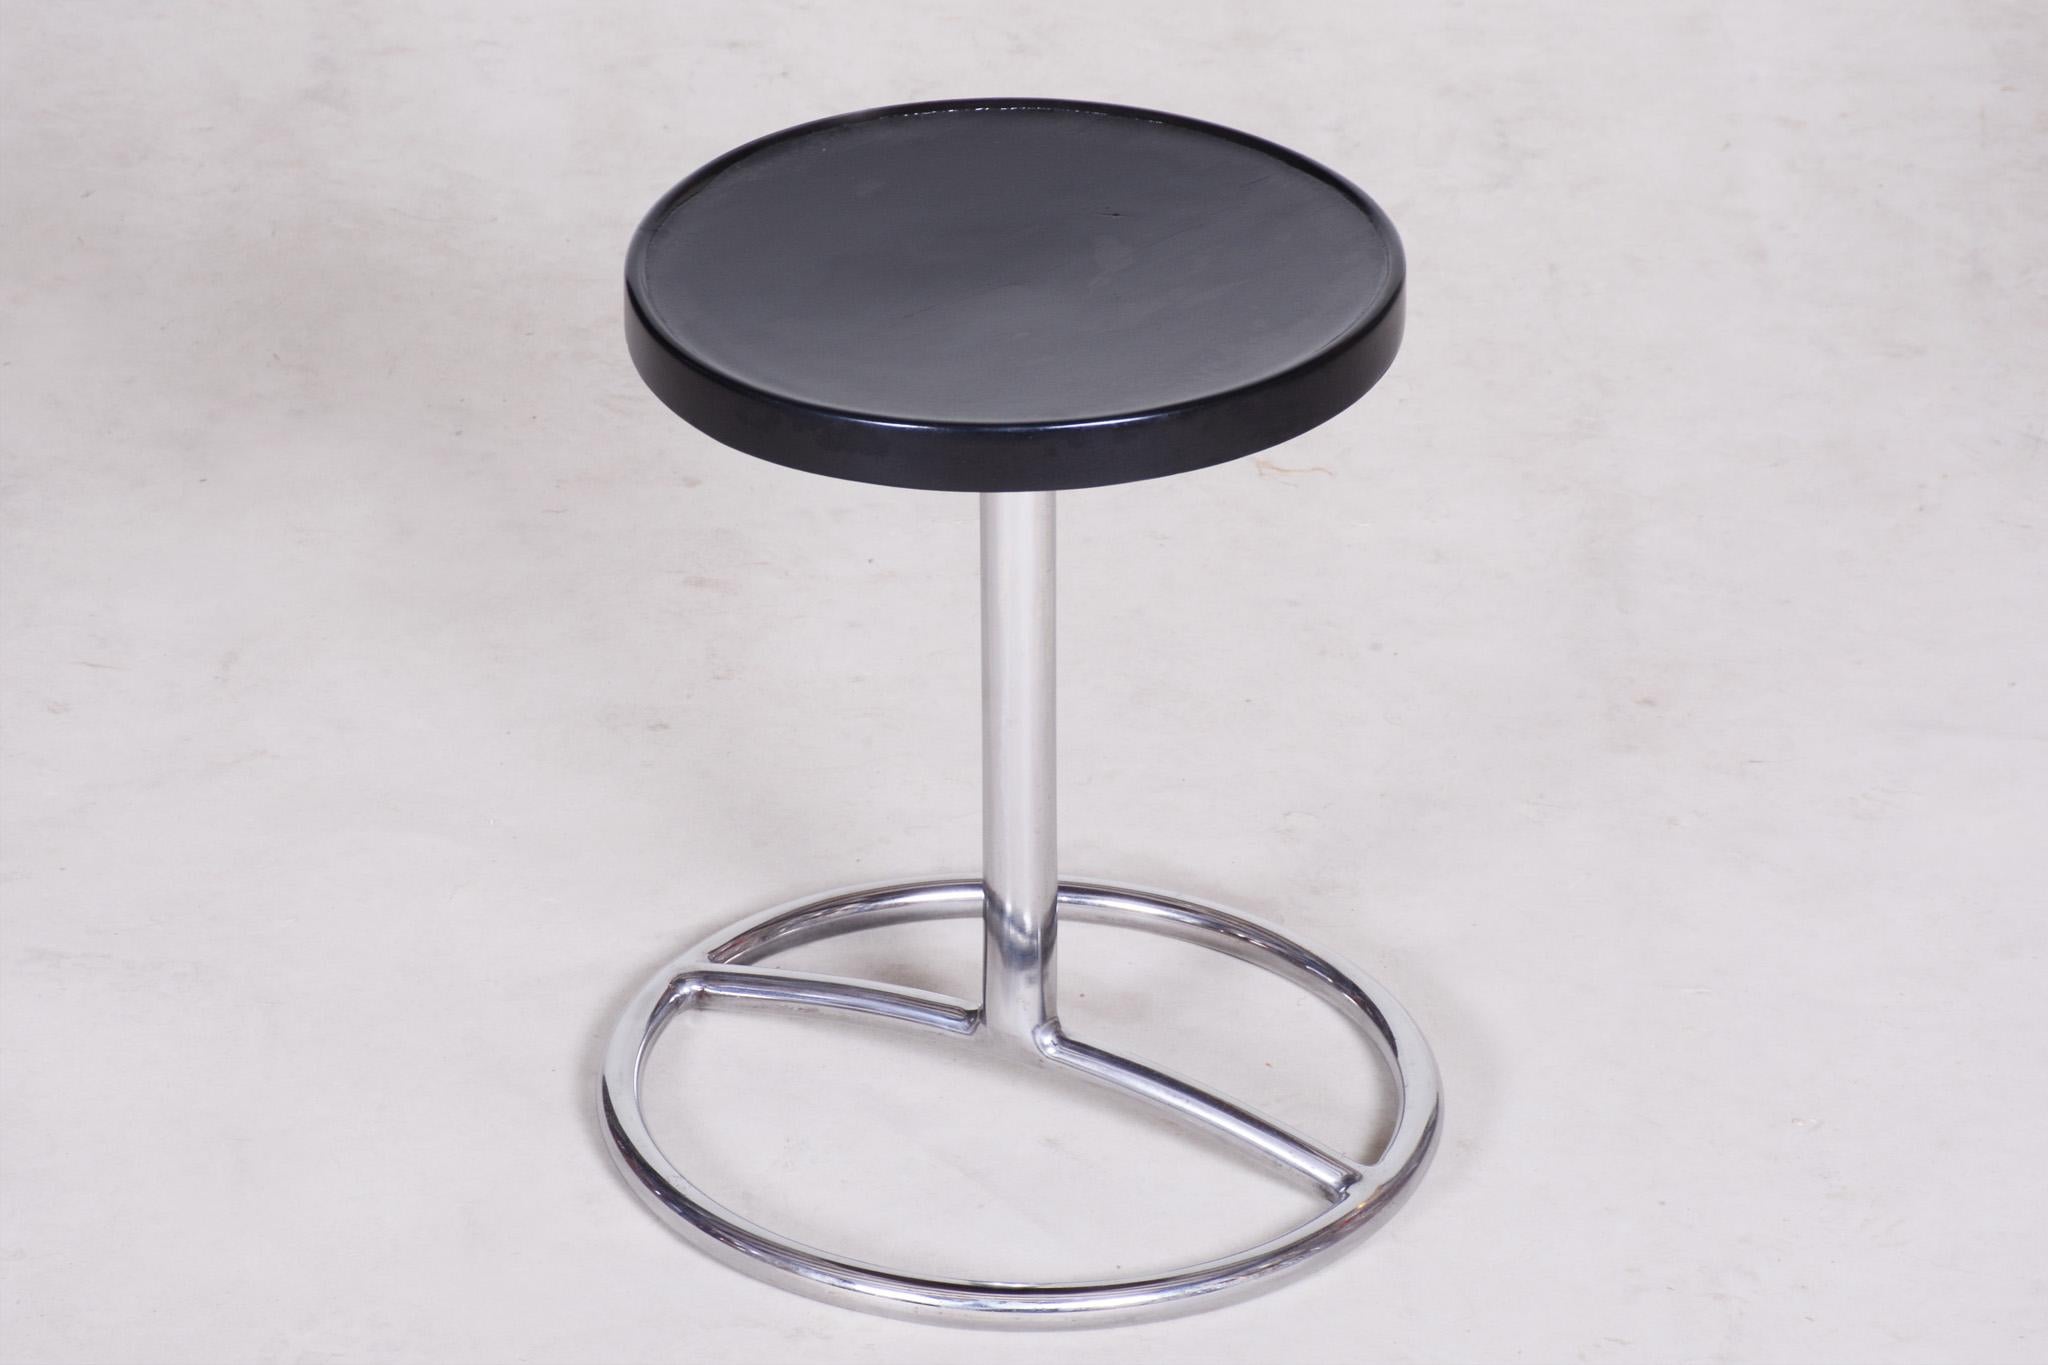 Czech Black Art Deco Round Piano Stool, Fully Restored, 1930s For Sale